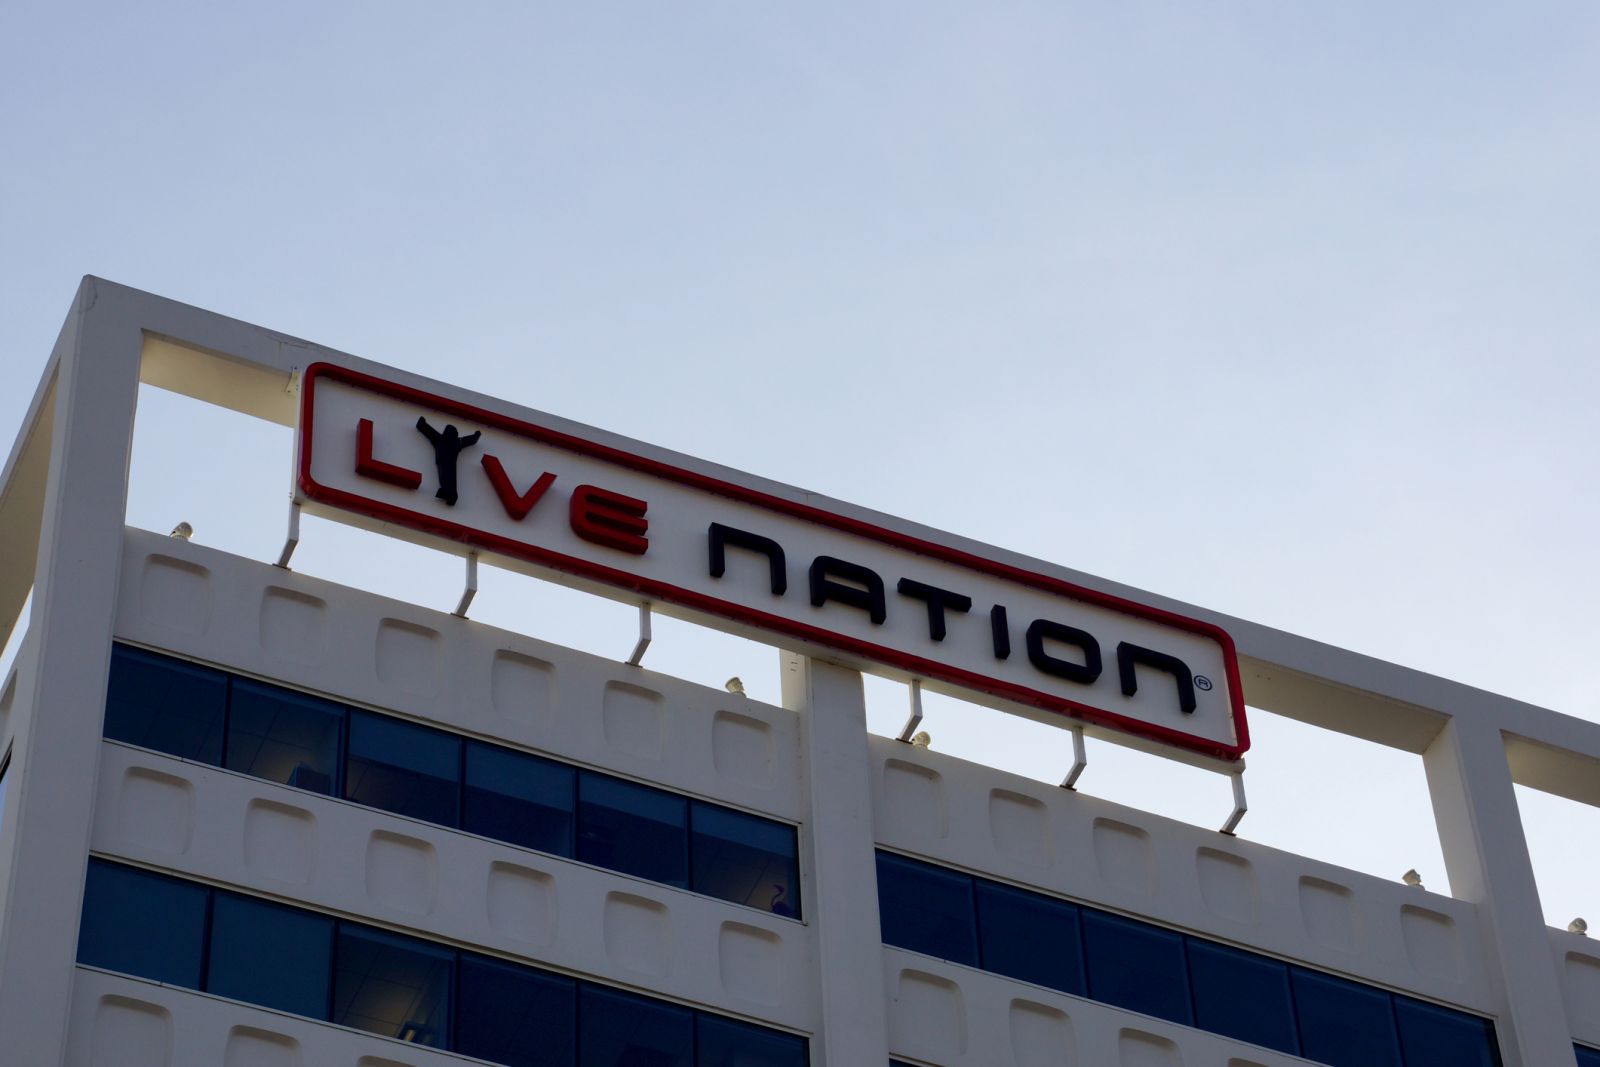 Communication Services - Live Nation Entertainment Inc building sign by-Eric Broder Van Dyke via iStock